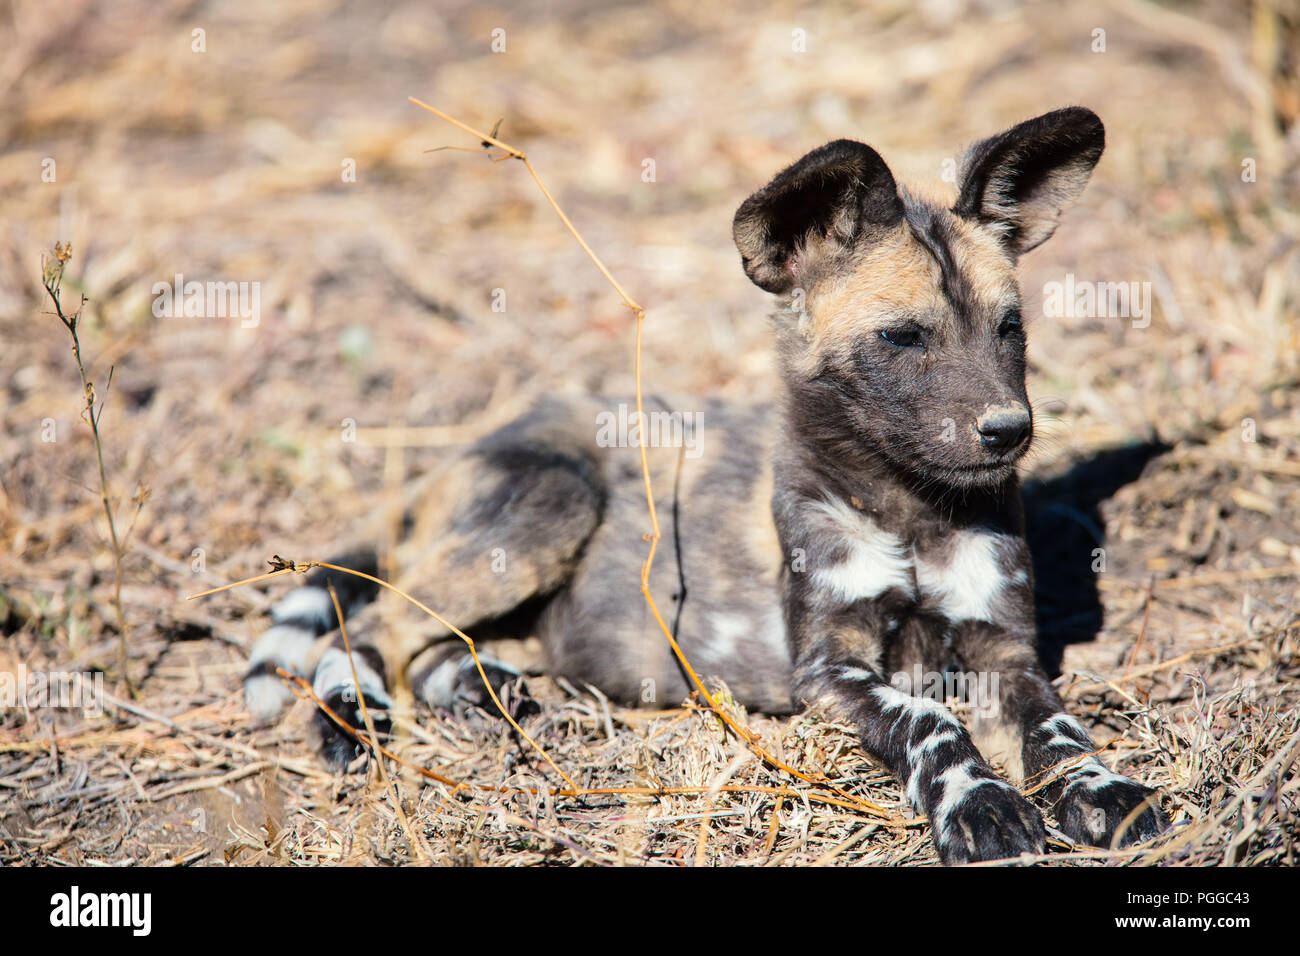 Endangered animal African wild dog puppy in safari park in South Africa Stock Photo